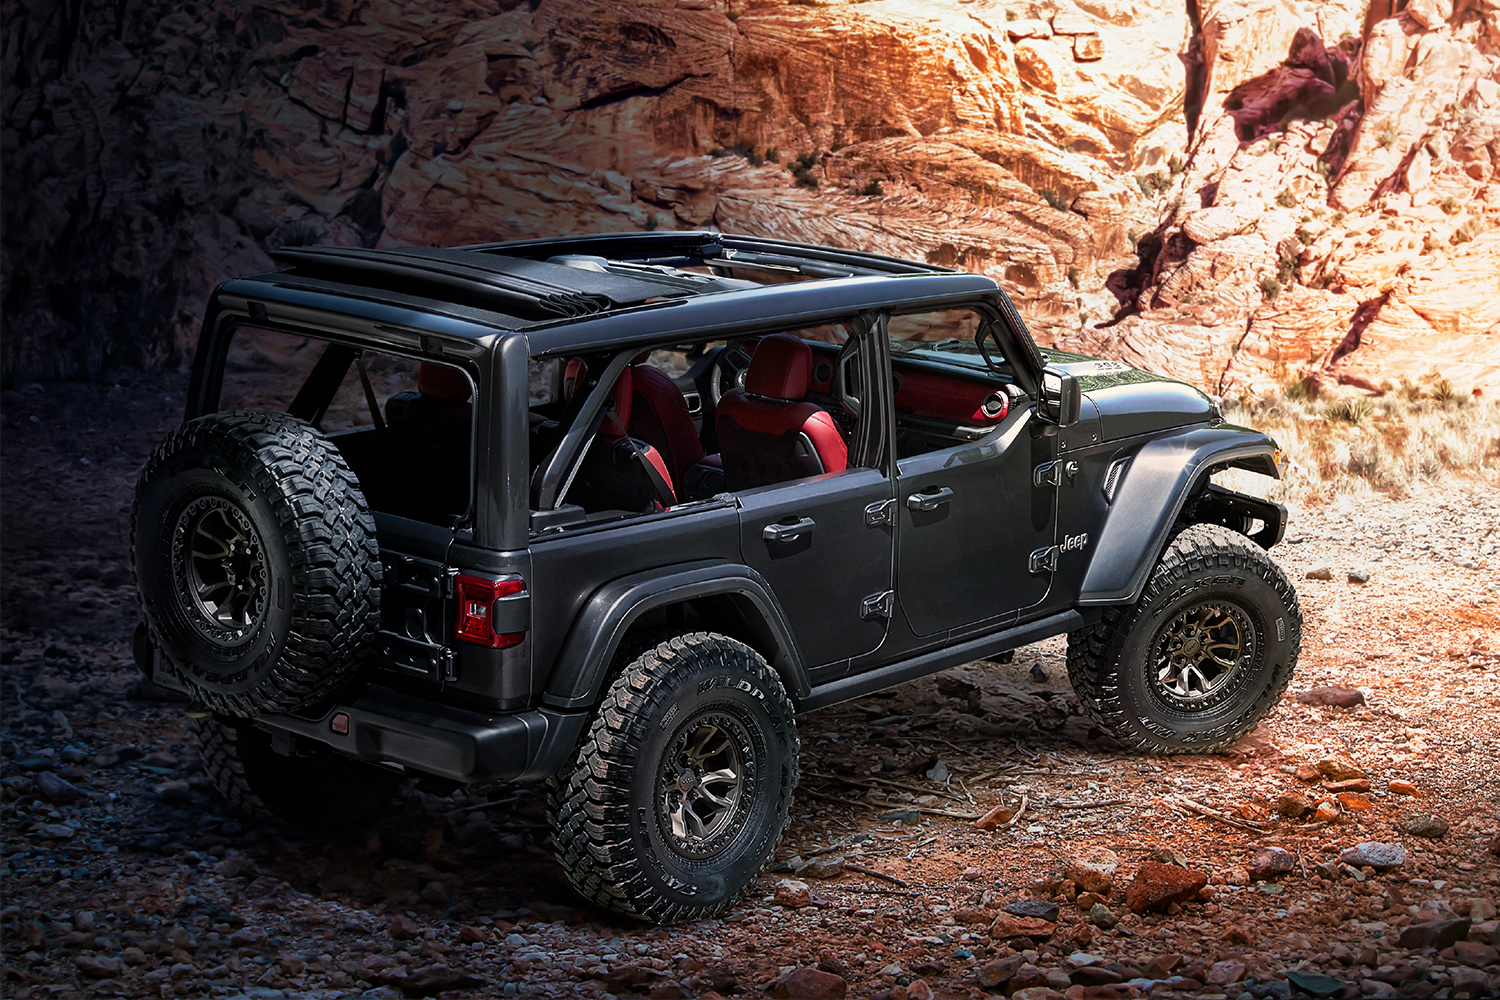 Jeep Confirms First-Ever V8 Wrangler, and It's Coming Soon - InsideHook